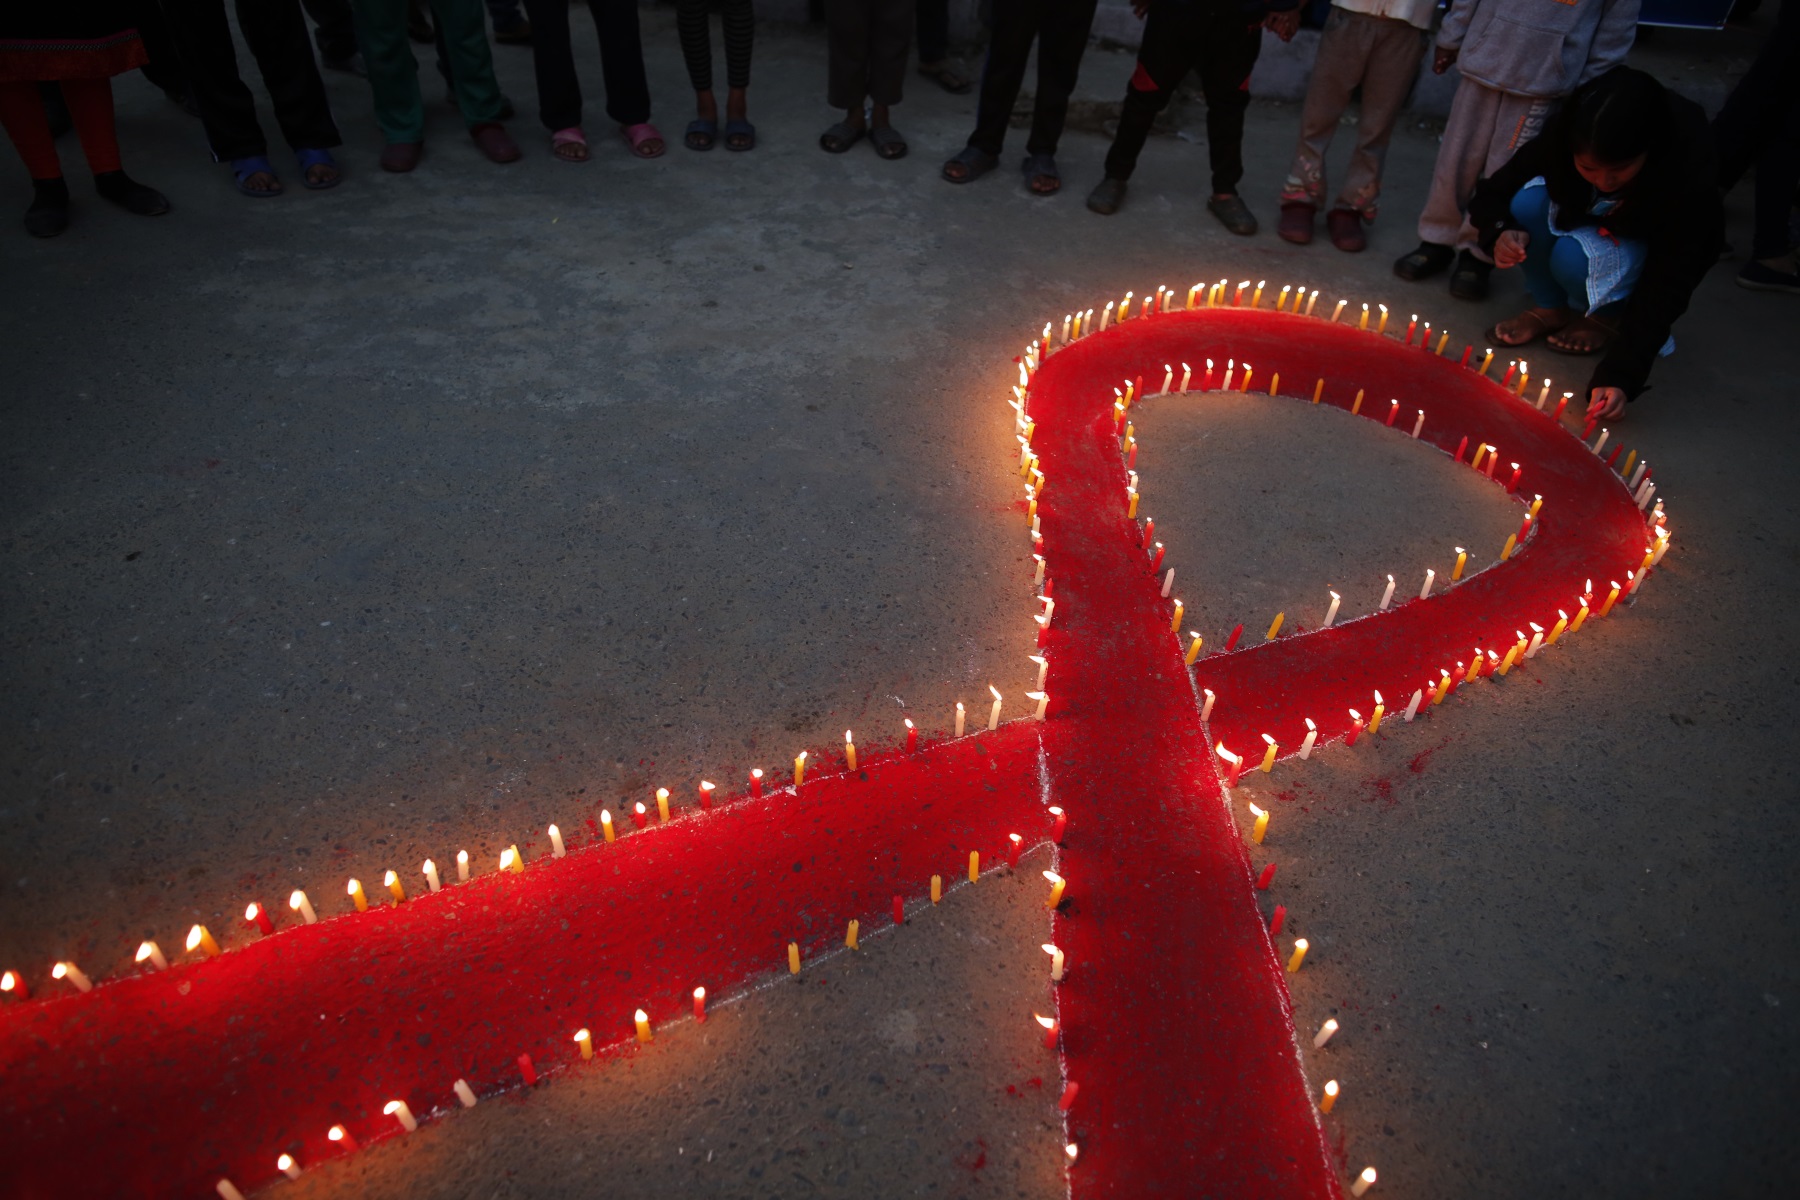 The World's Largest HIV Epidemic in Crisis: HIV in South Africa